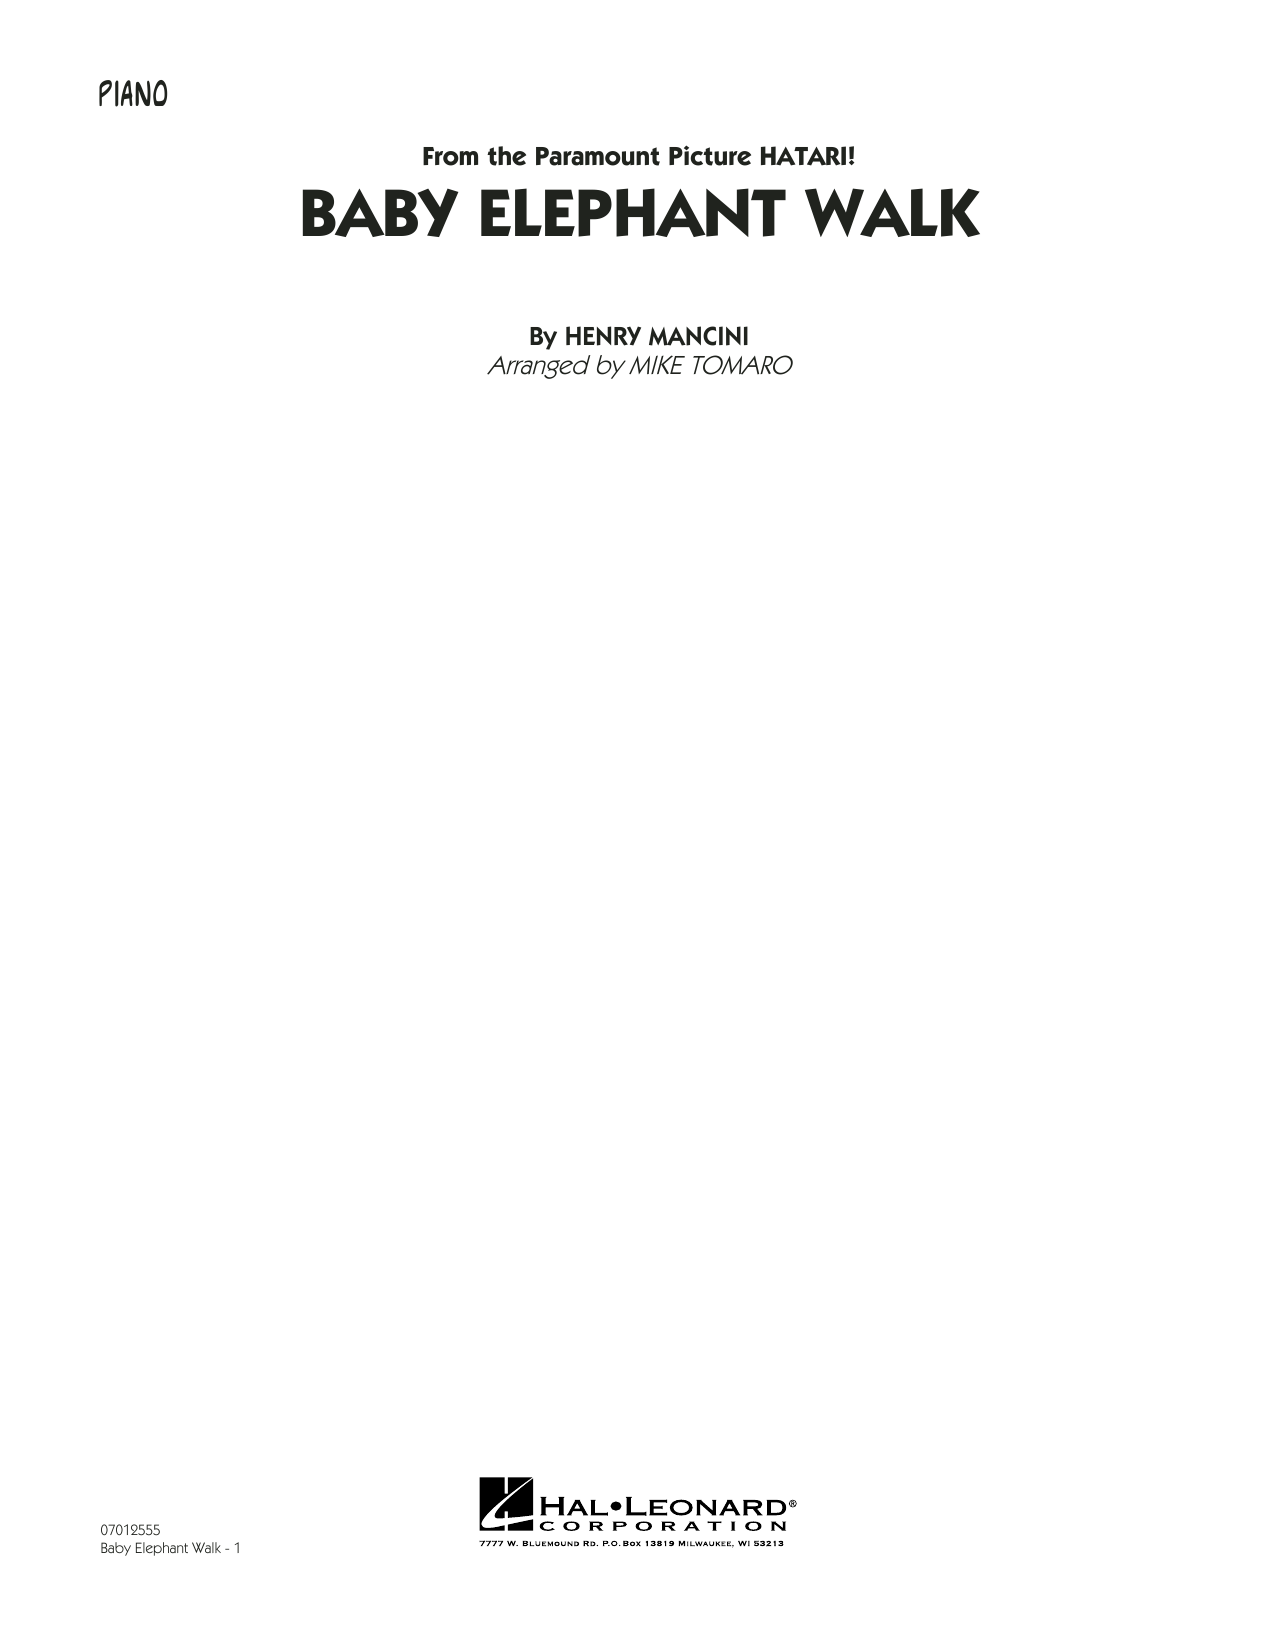 Mike Tomaro Baby Elephant Walk - Piano sheet music notes and chords. Download Printable PDF.